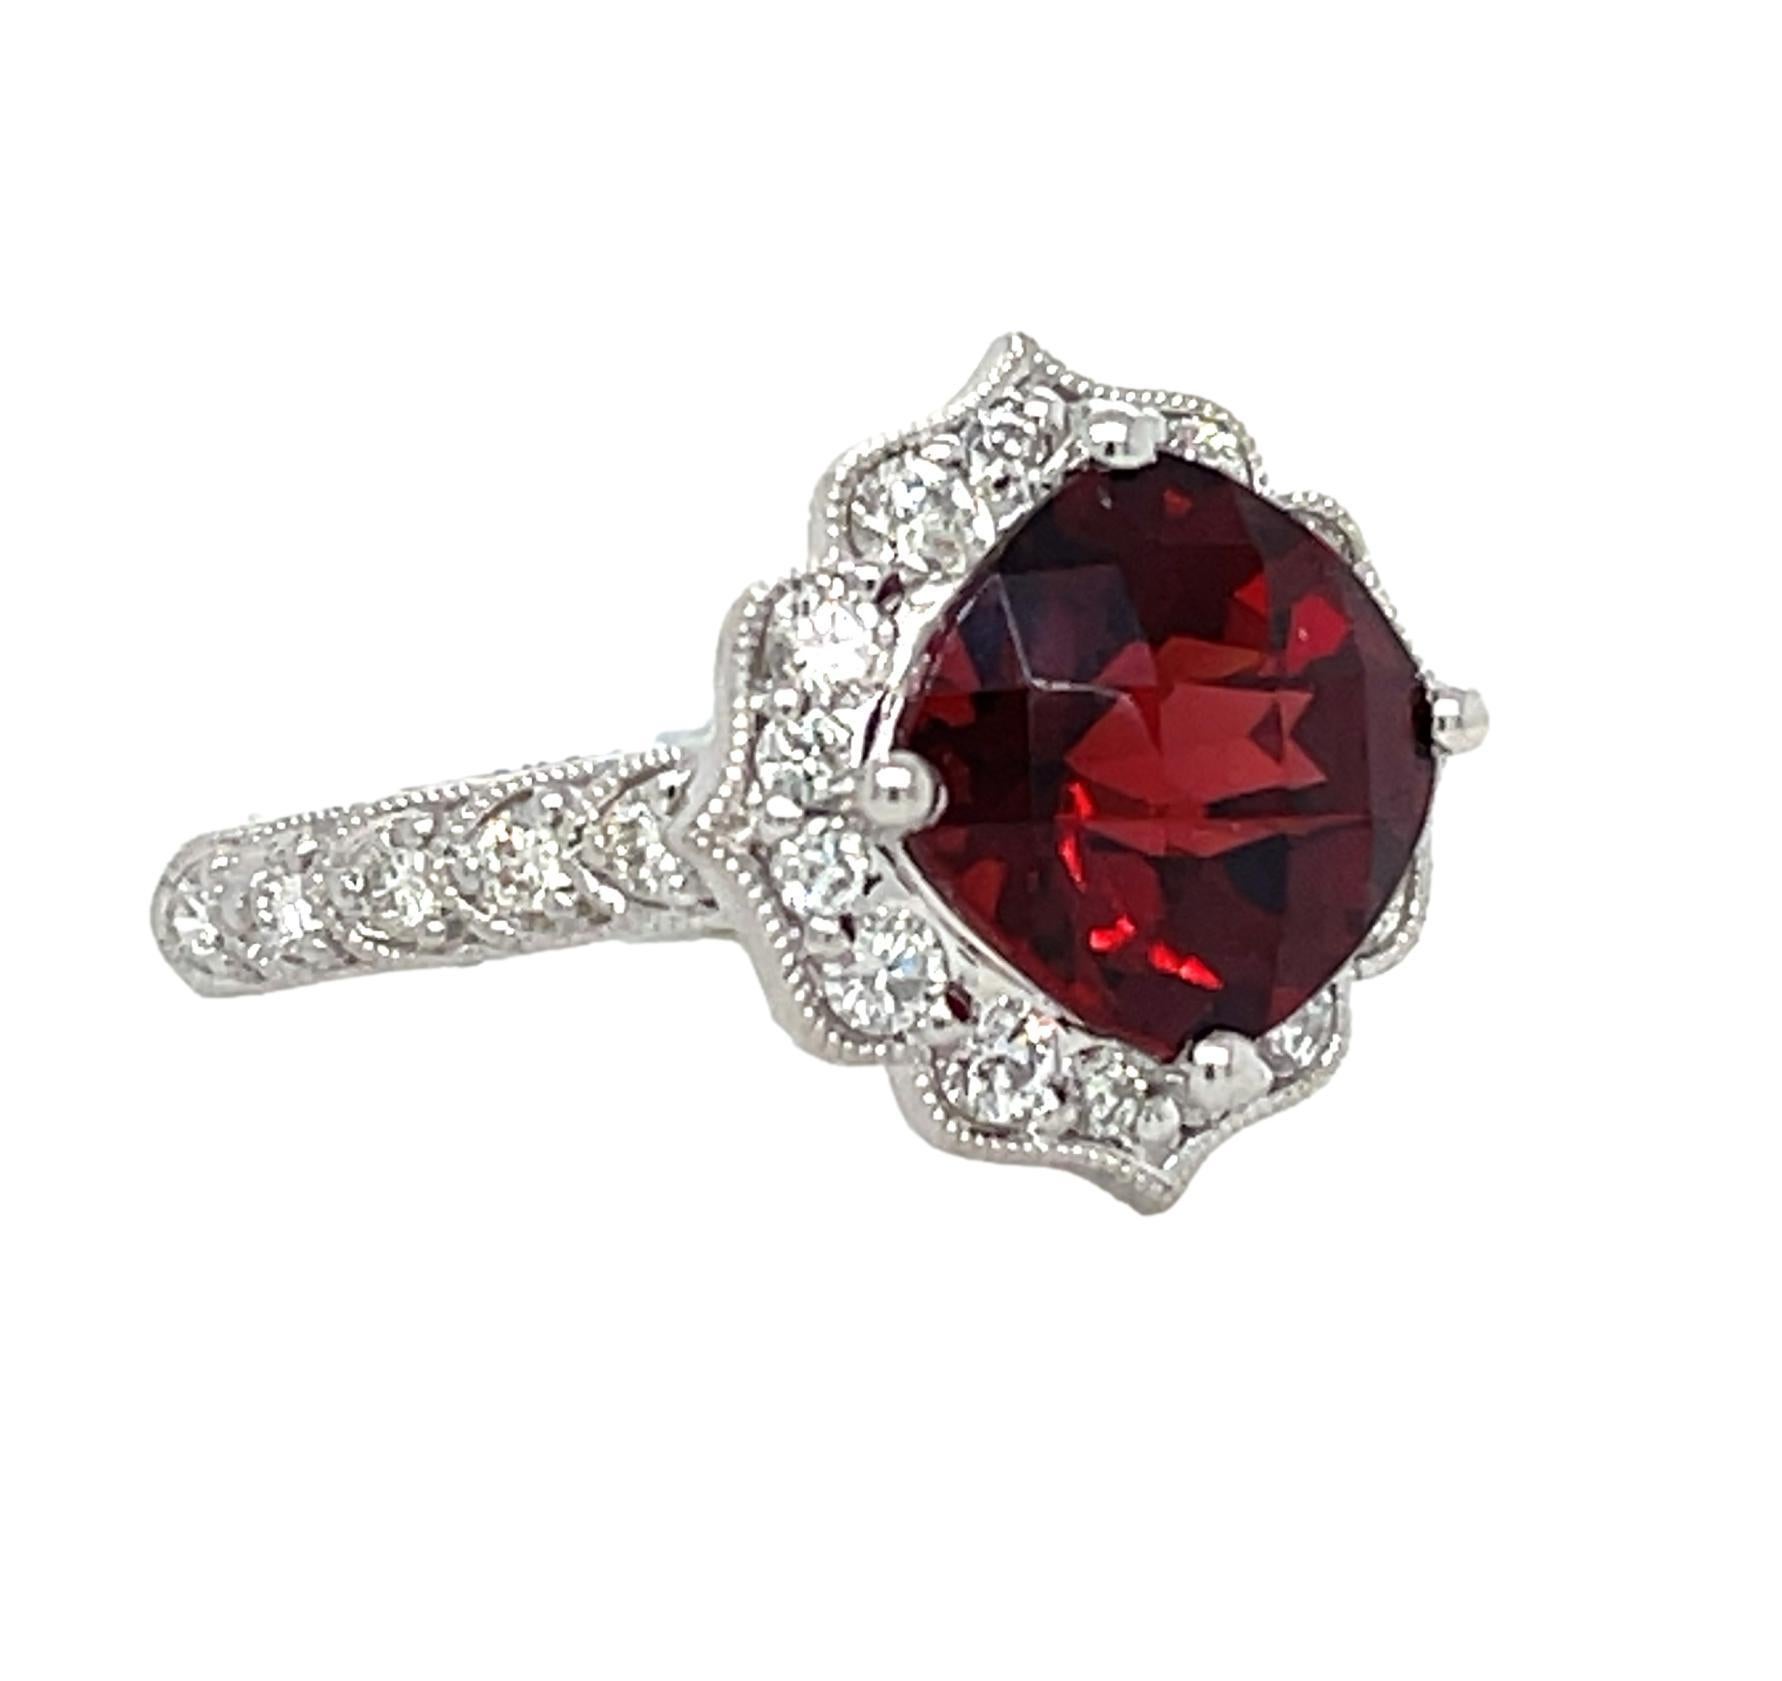 This stunning ring has a 9x9mm checkerboard cushion Garnet set in 14 karat white gold. There are 26 shimmering diamonds around the center stone and on the shank for a delicate accent. This ring will be shipped in a beautiful box, ready for the